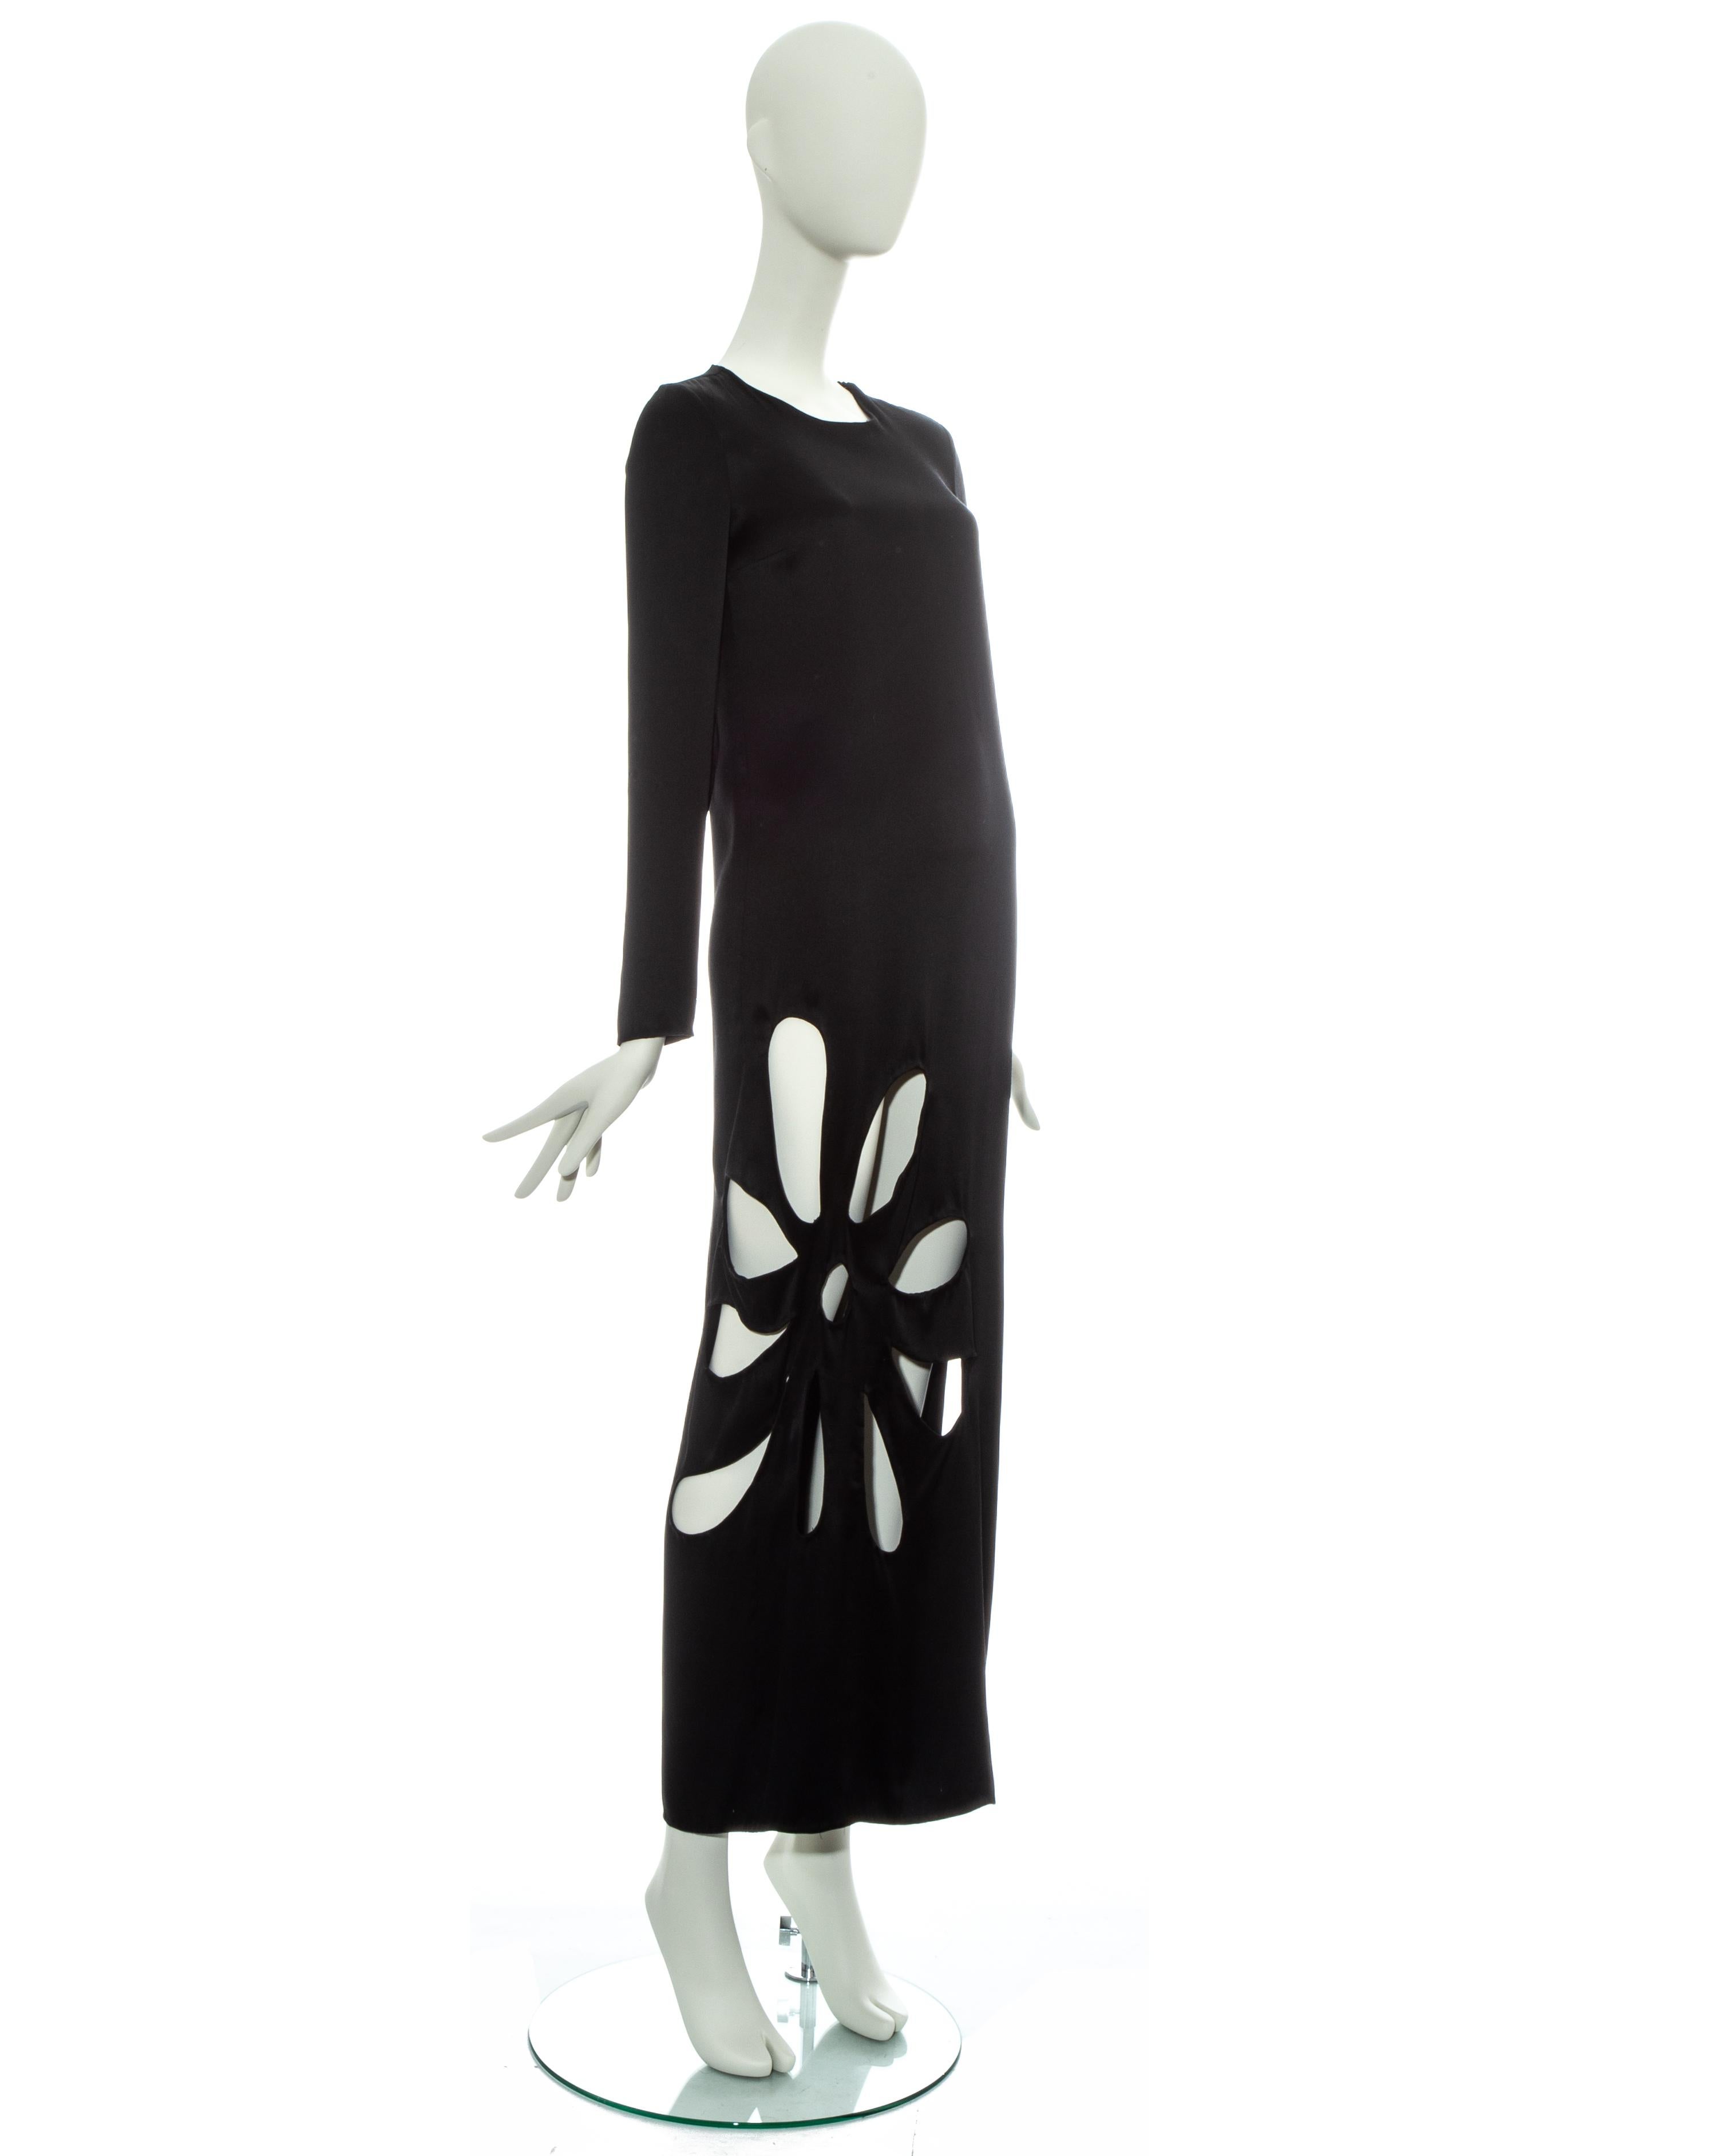 Gucci by Tom Ford black silk column dress with cut outs in the shape of a flower and leg slit on side seam

Spring-Summer 2002